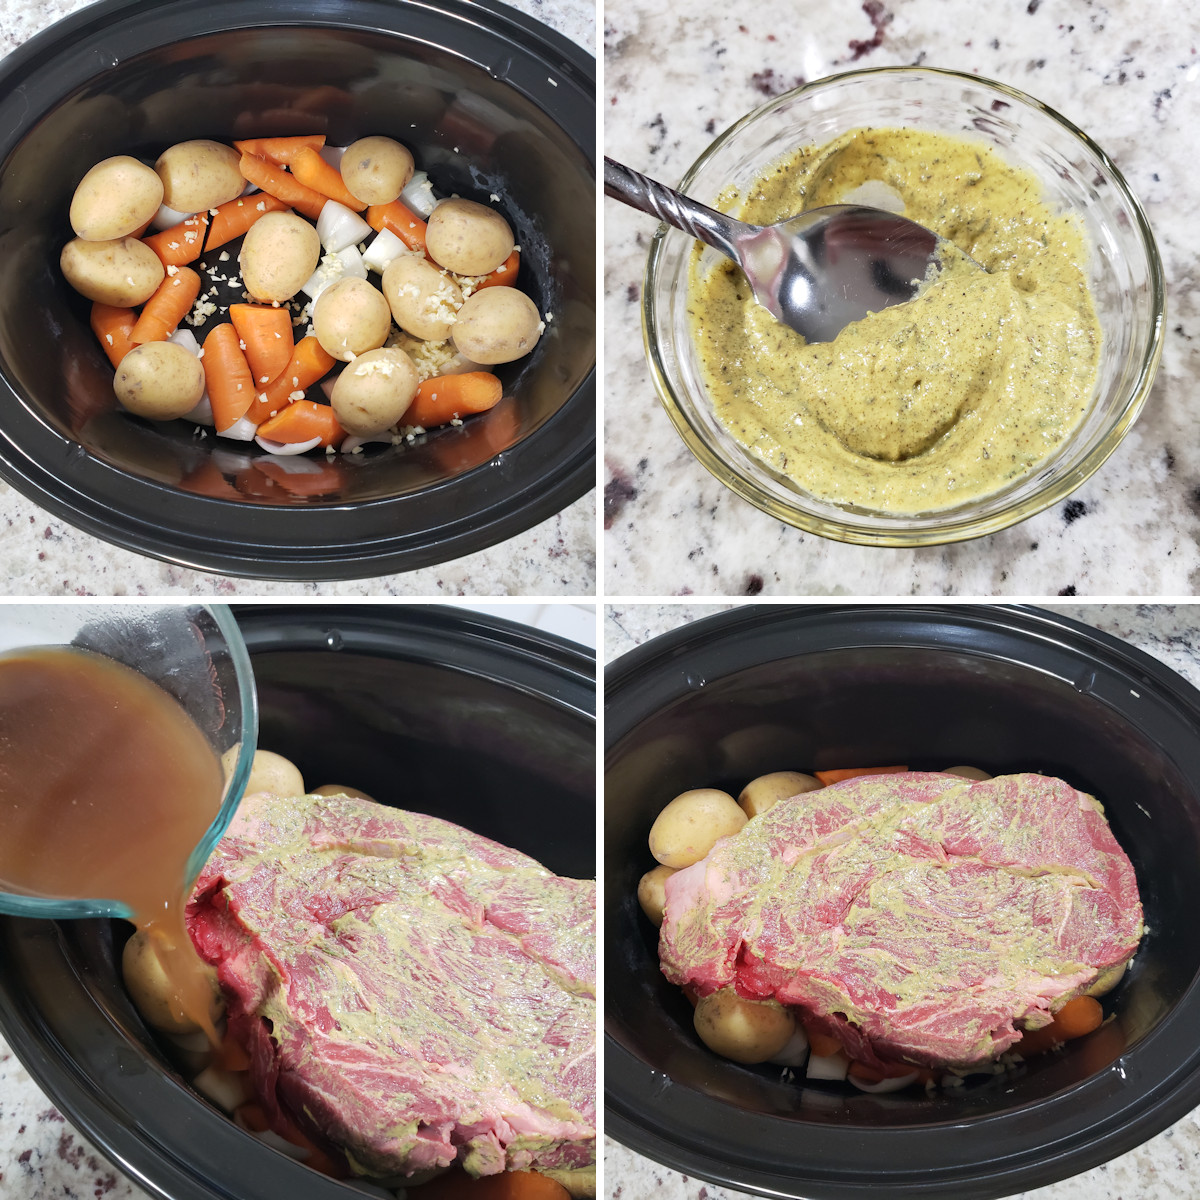 Adding ingredients to a slow cooker.